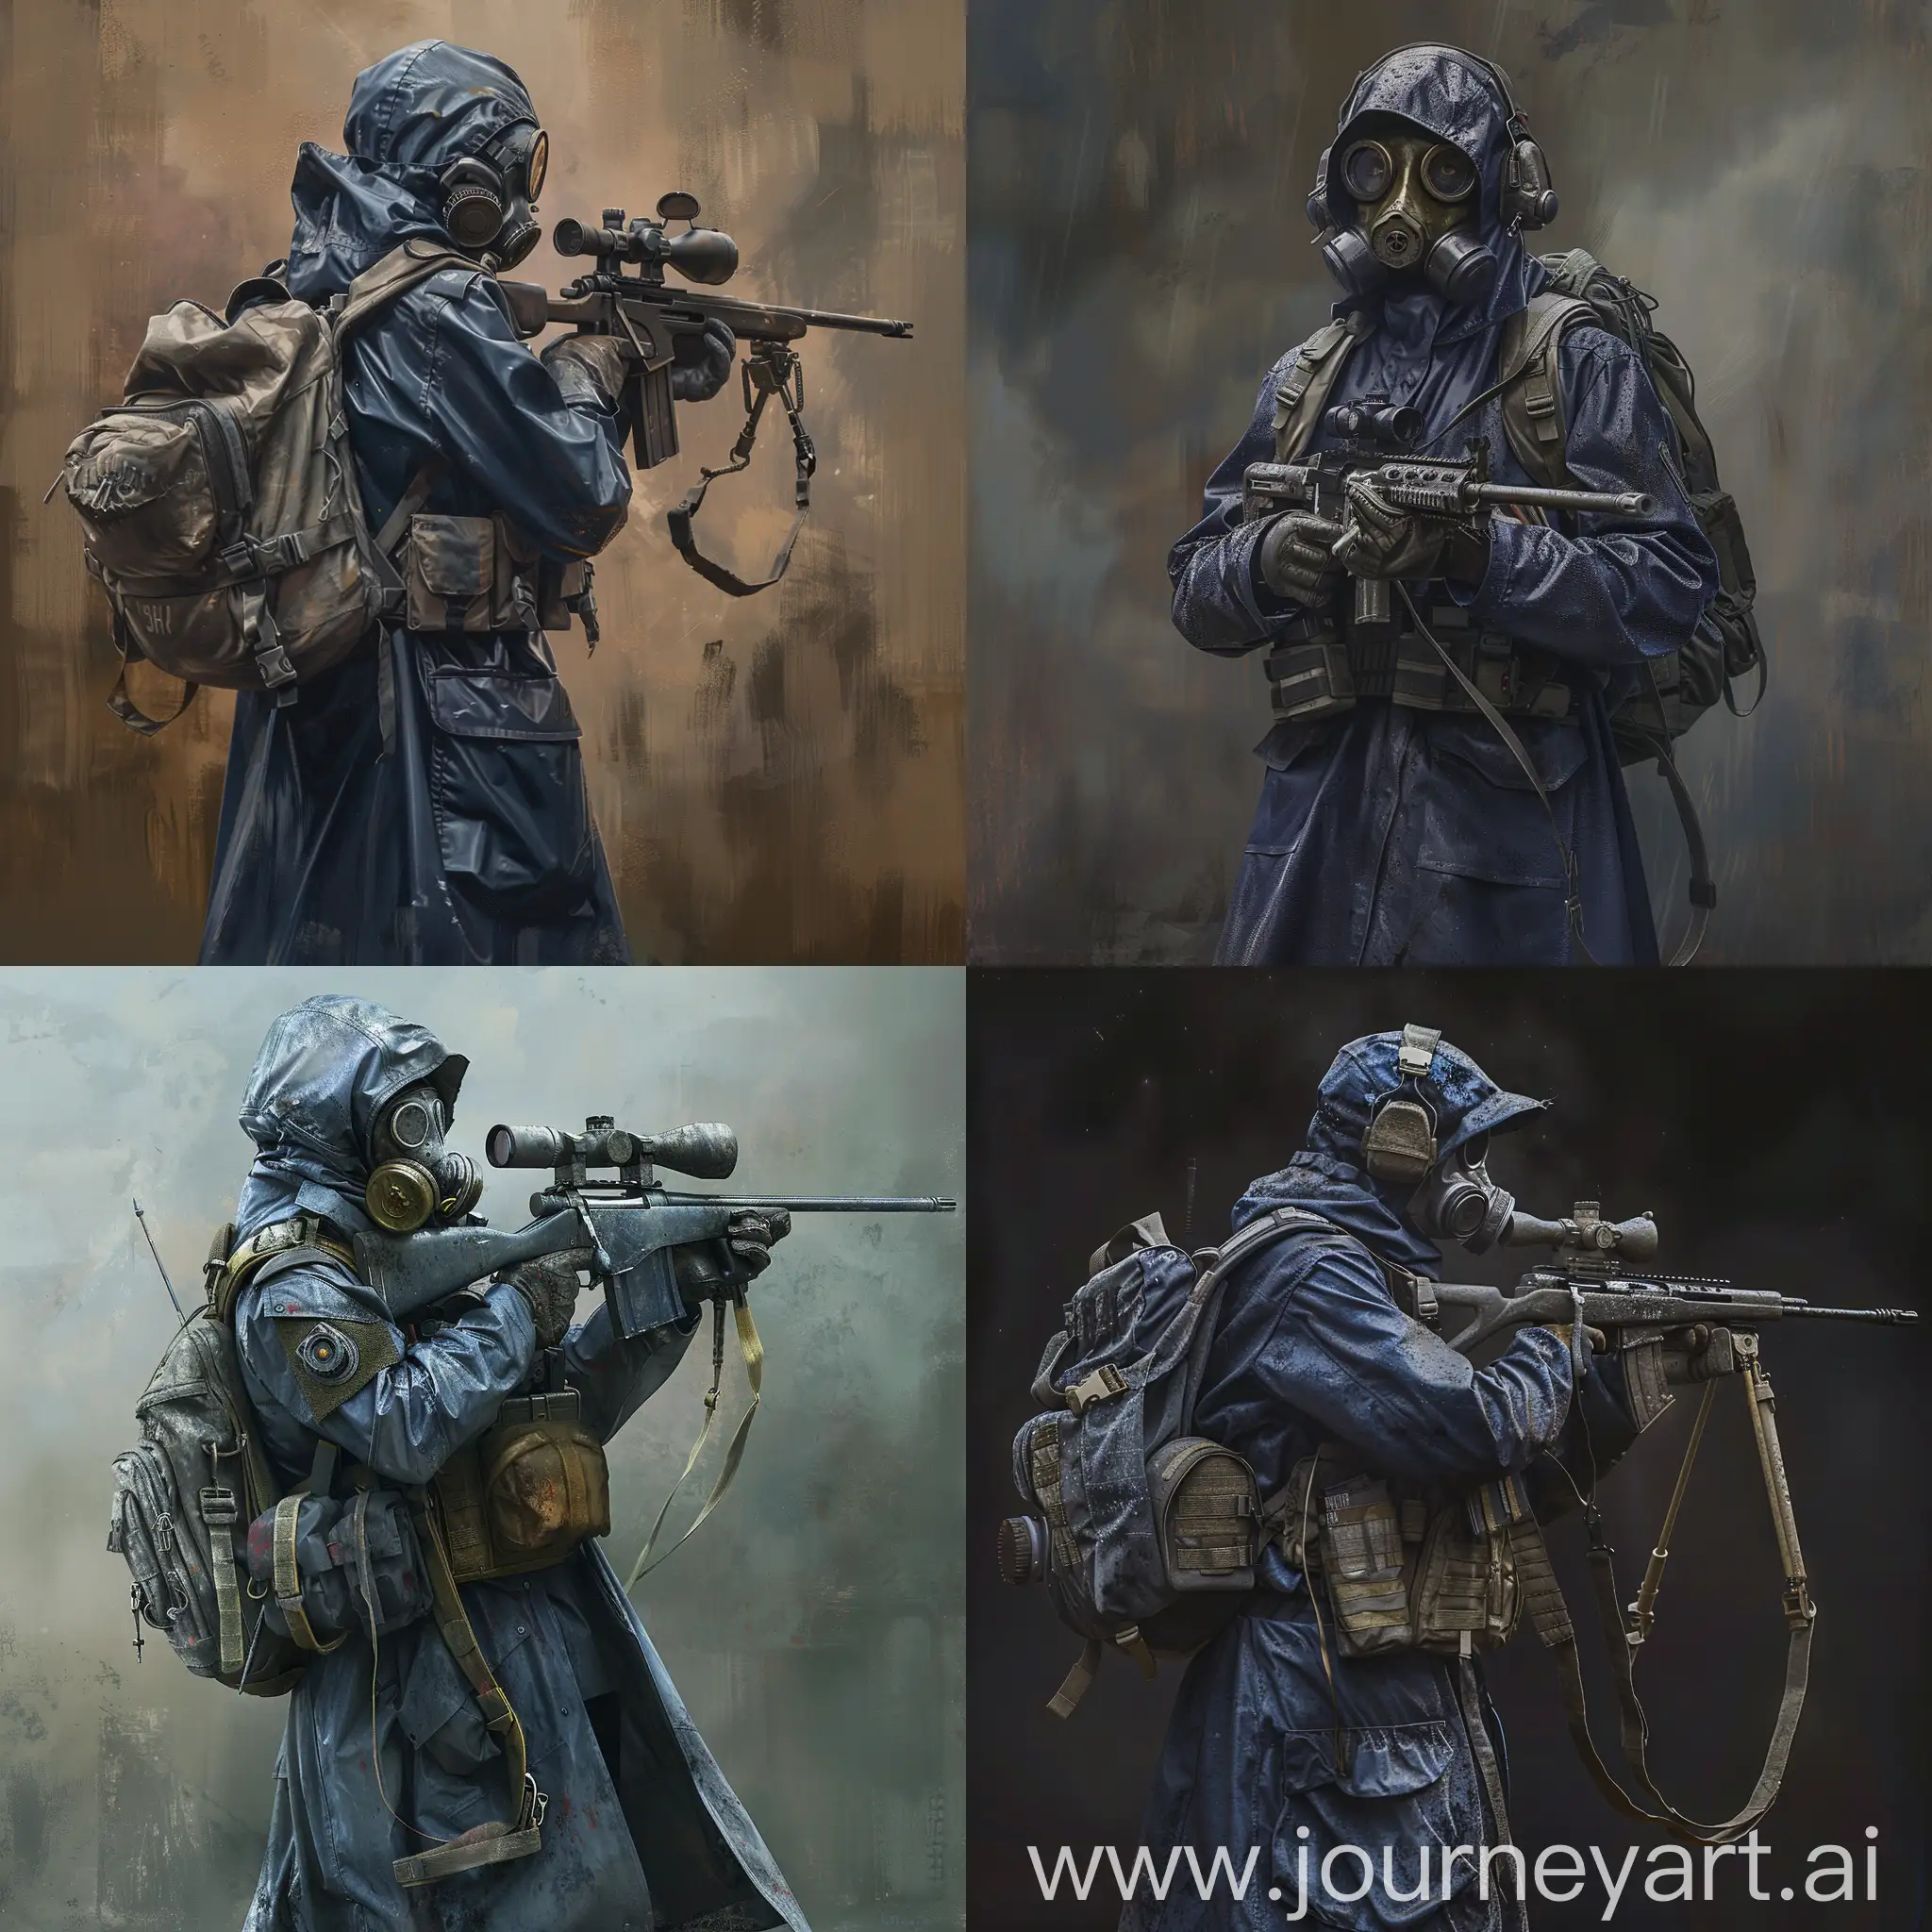 art a mercenary from the universe of S.T.A.L.K.E.R., a mercenary dressed in a dark blue military raincoat, gray military armor on his body, a gas mask on his face, a small military backpack on his back, sniper rifle in his hands, mercenary navigating hazardous anomalies, in the Chernobyl Exclusion Zone, searching for valuable artifacts while unraveling the mysteries of the Zone's dark past and struggling to survive against all odds.